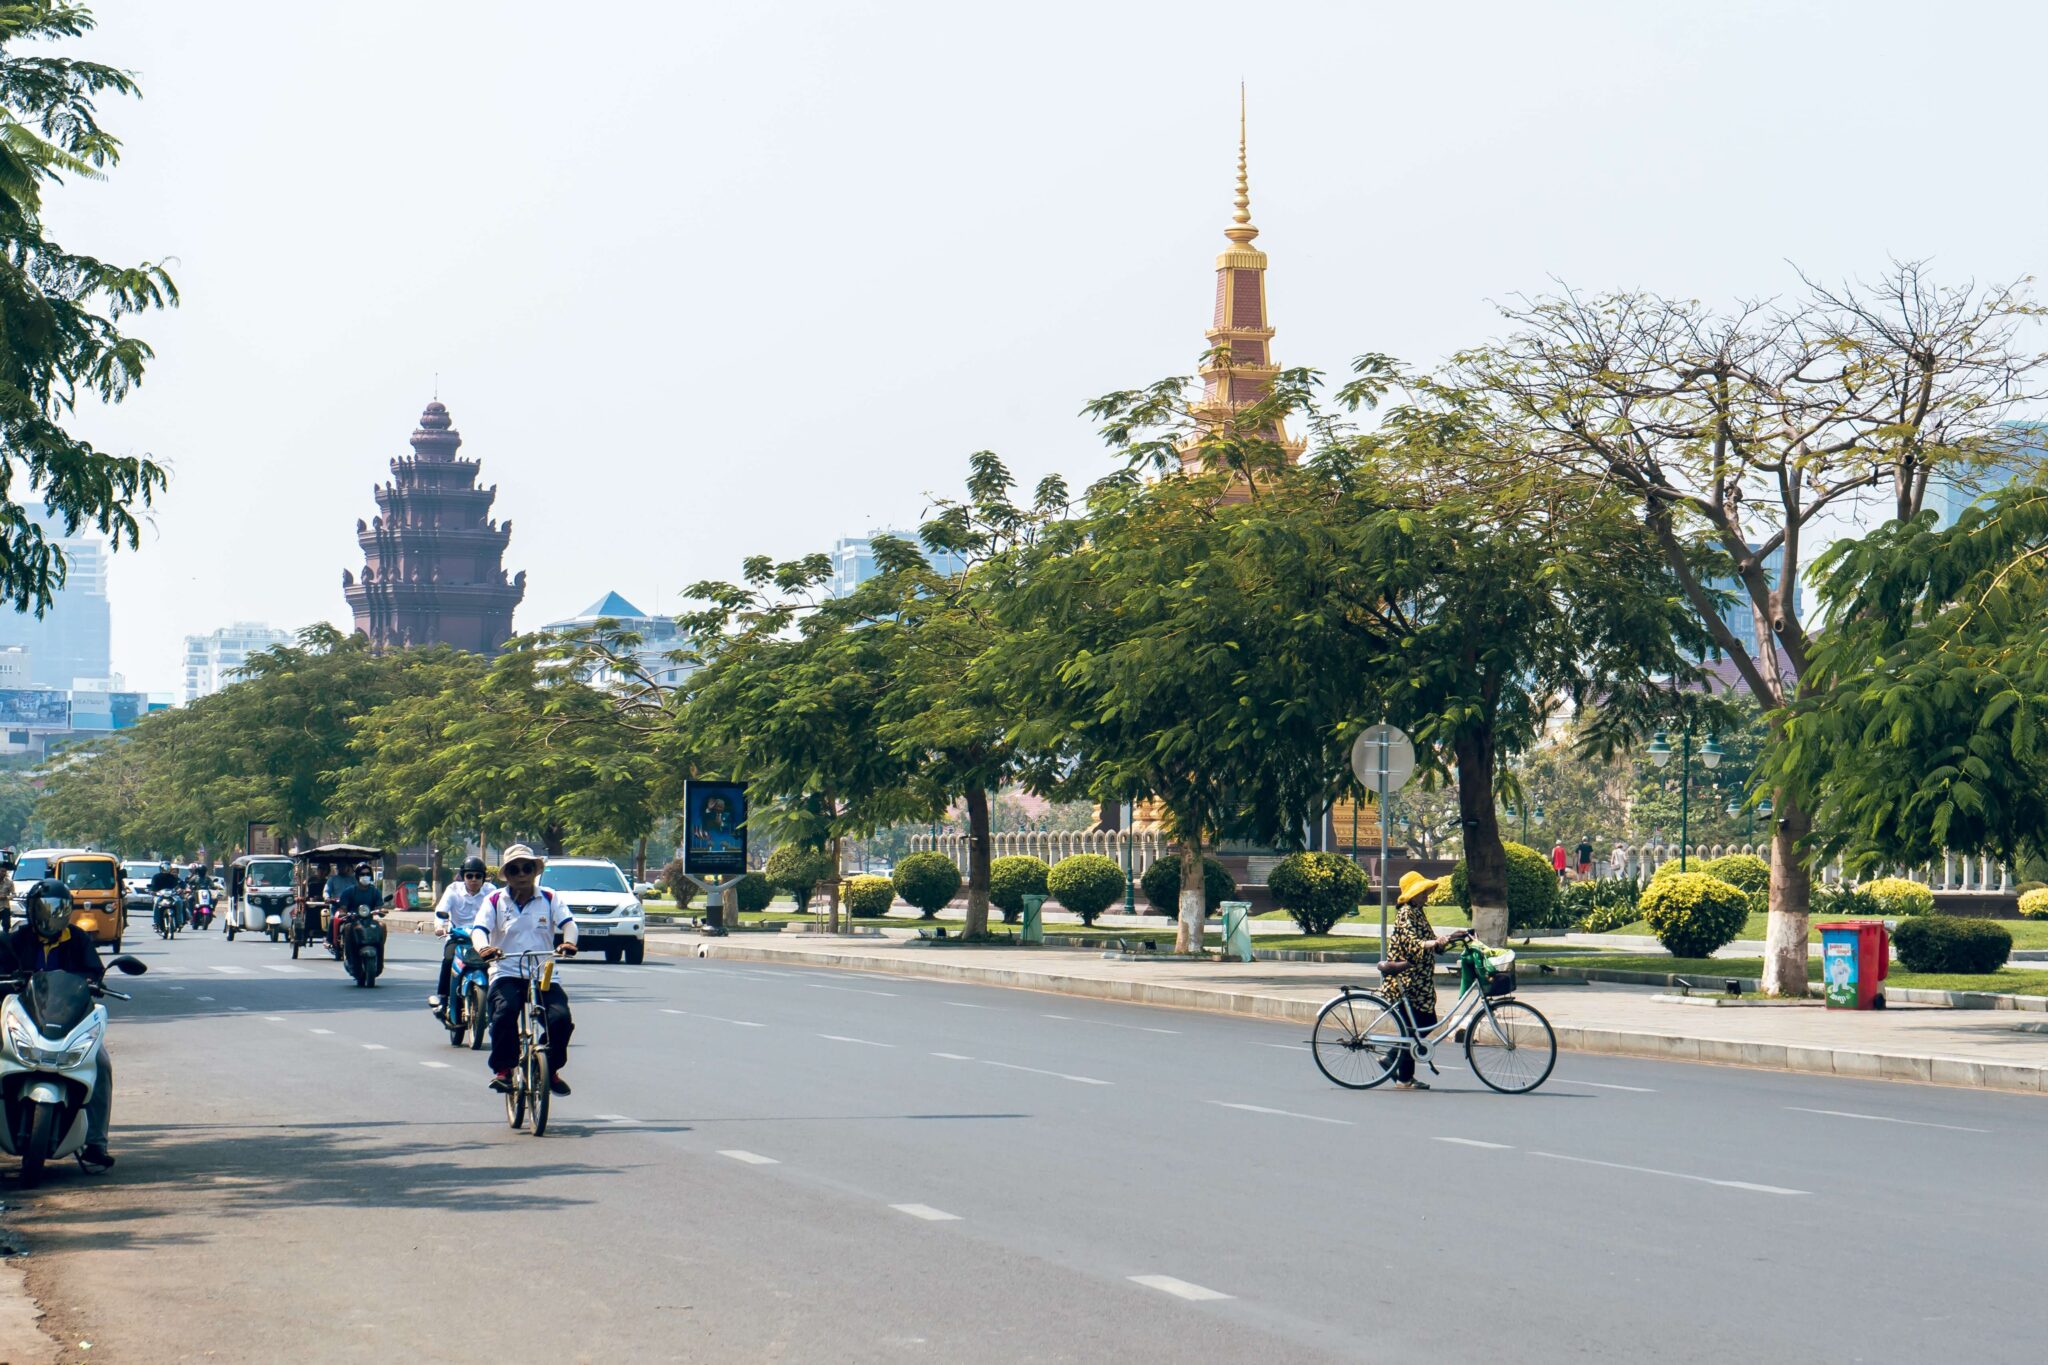 A city street in Cambodia - people are biking and a few cars are driving.